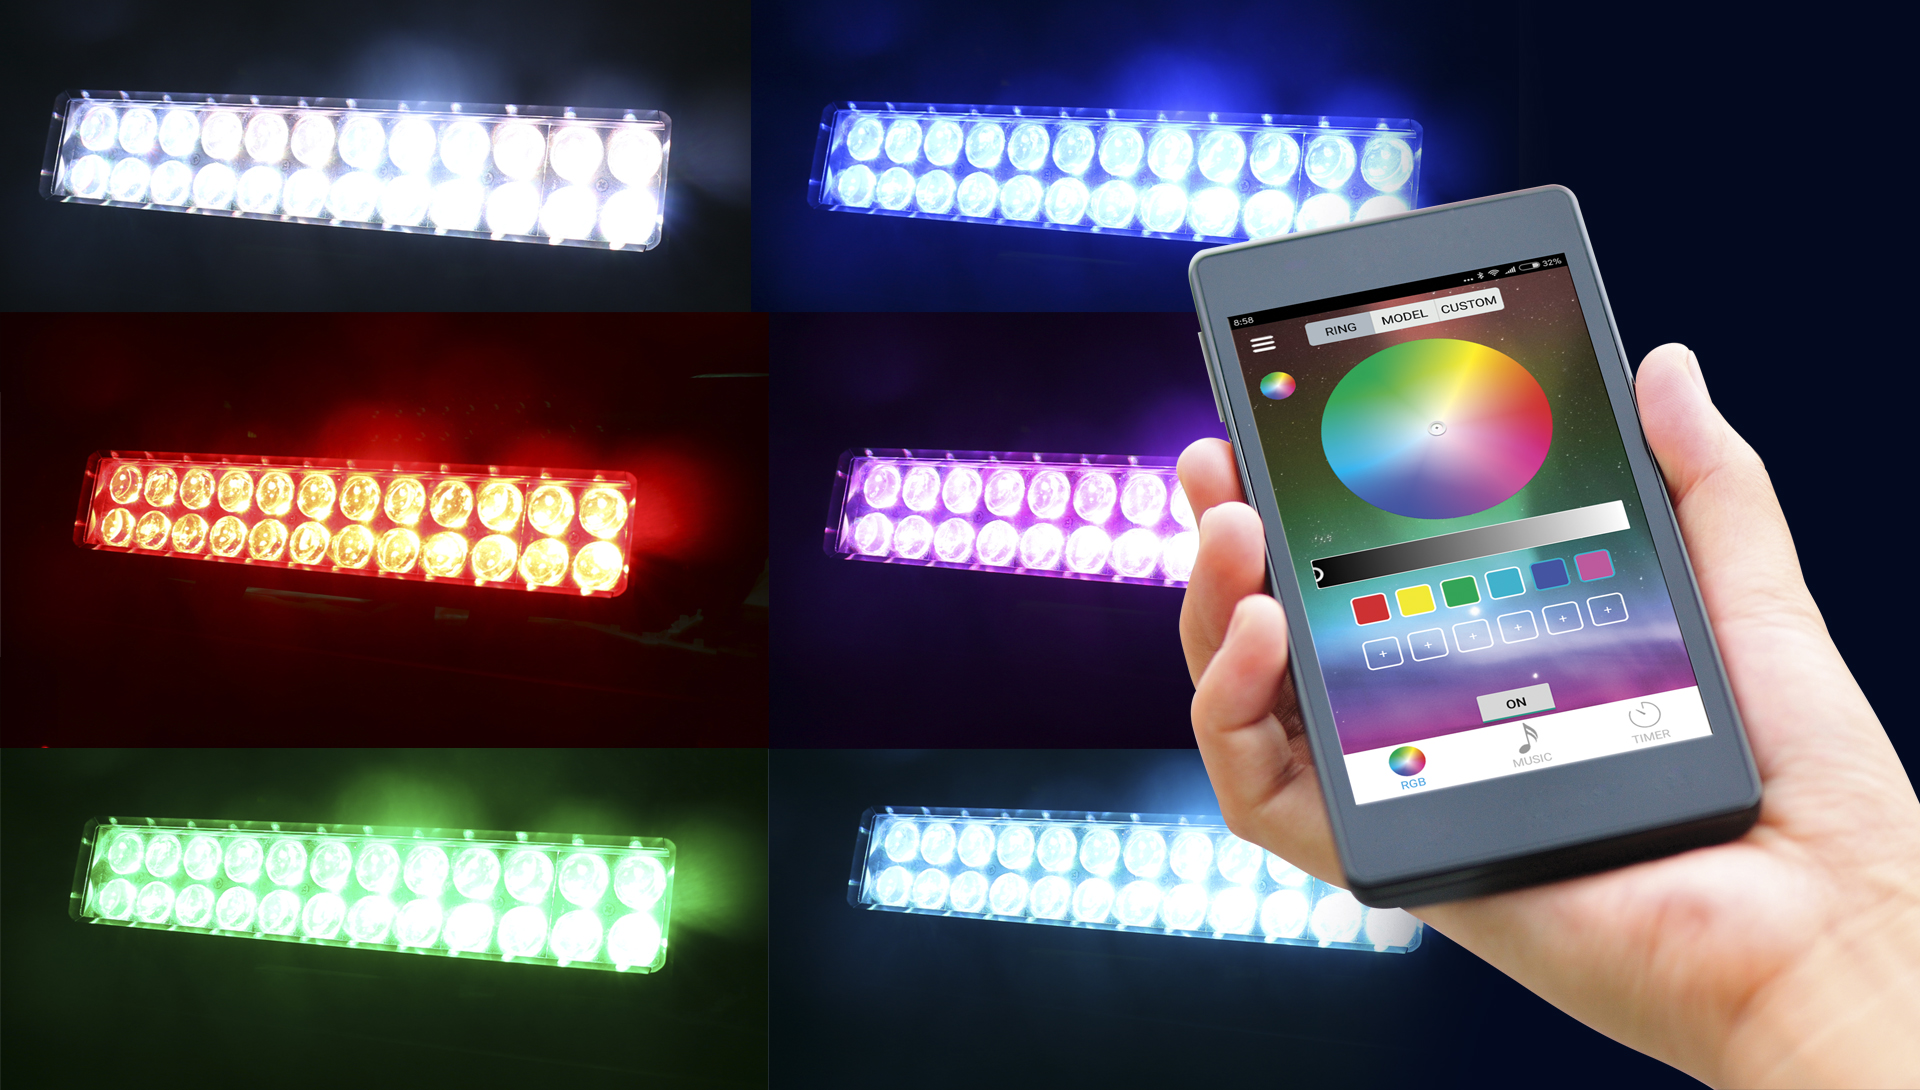 Innovation in RGB LED lighting in HELLA accessories